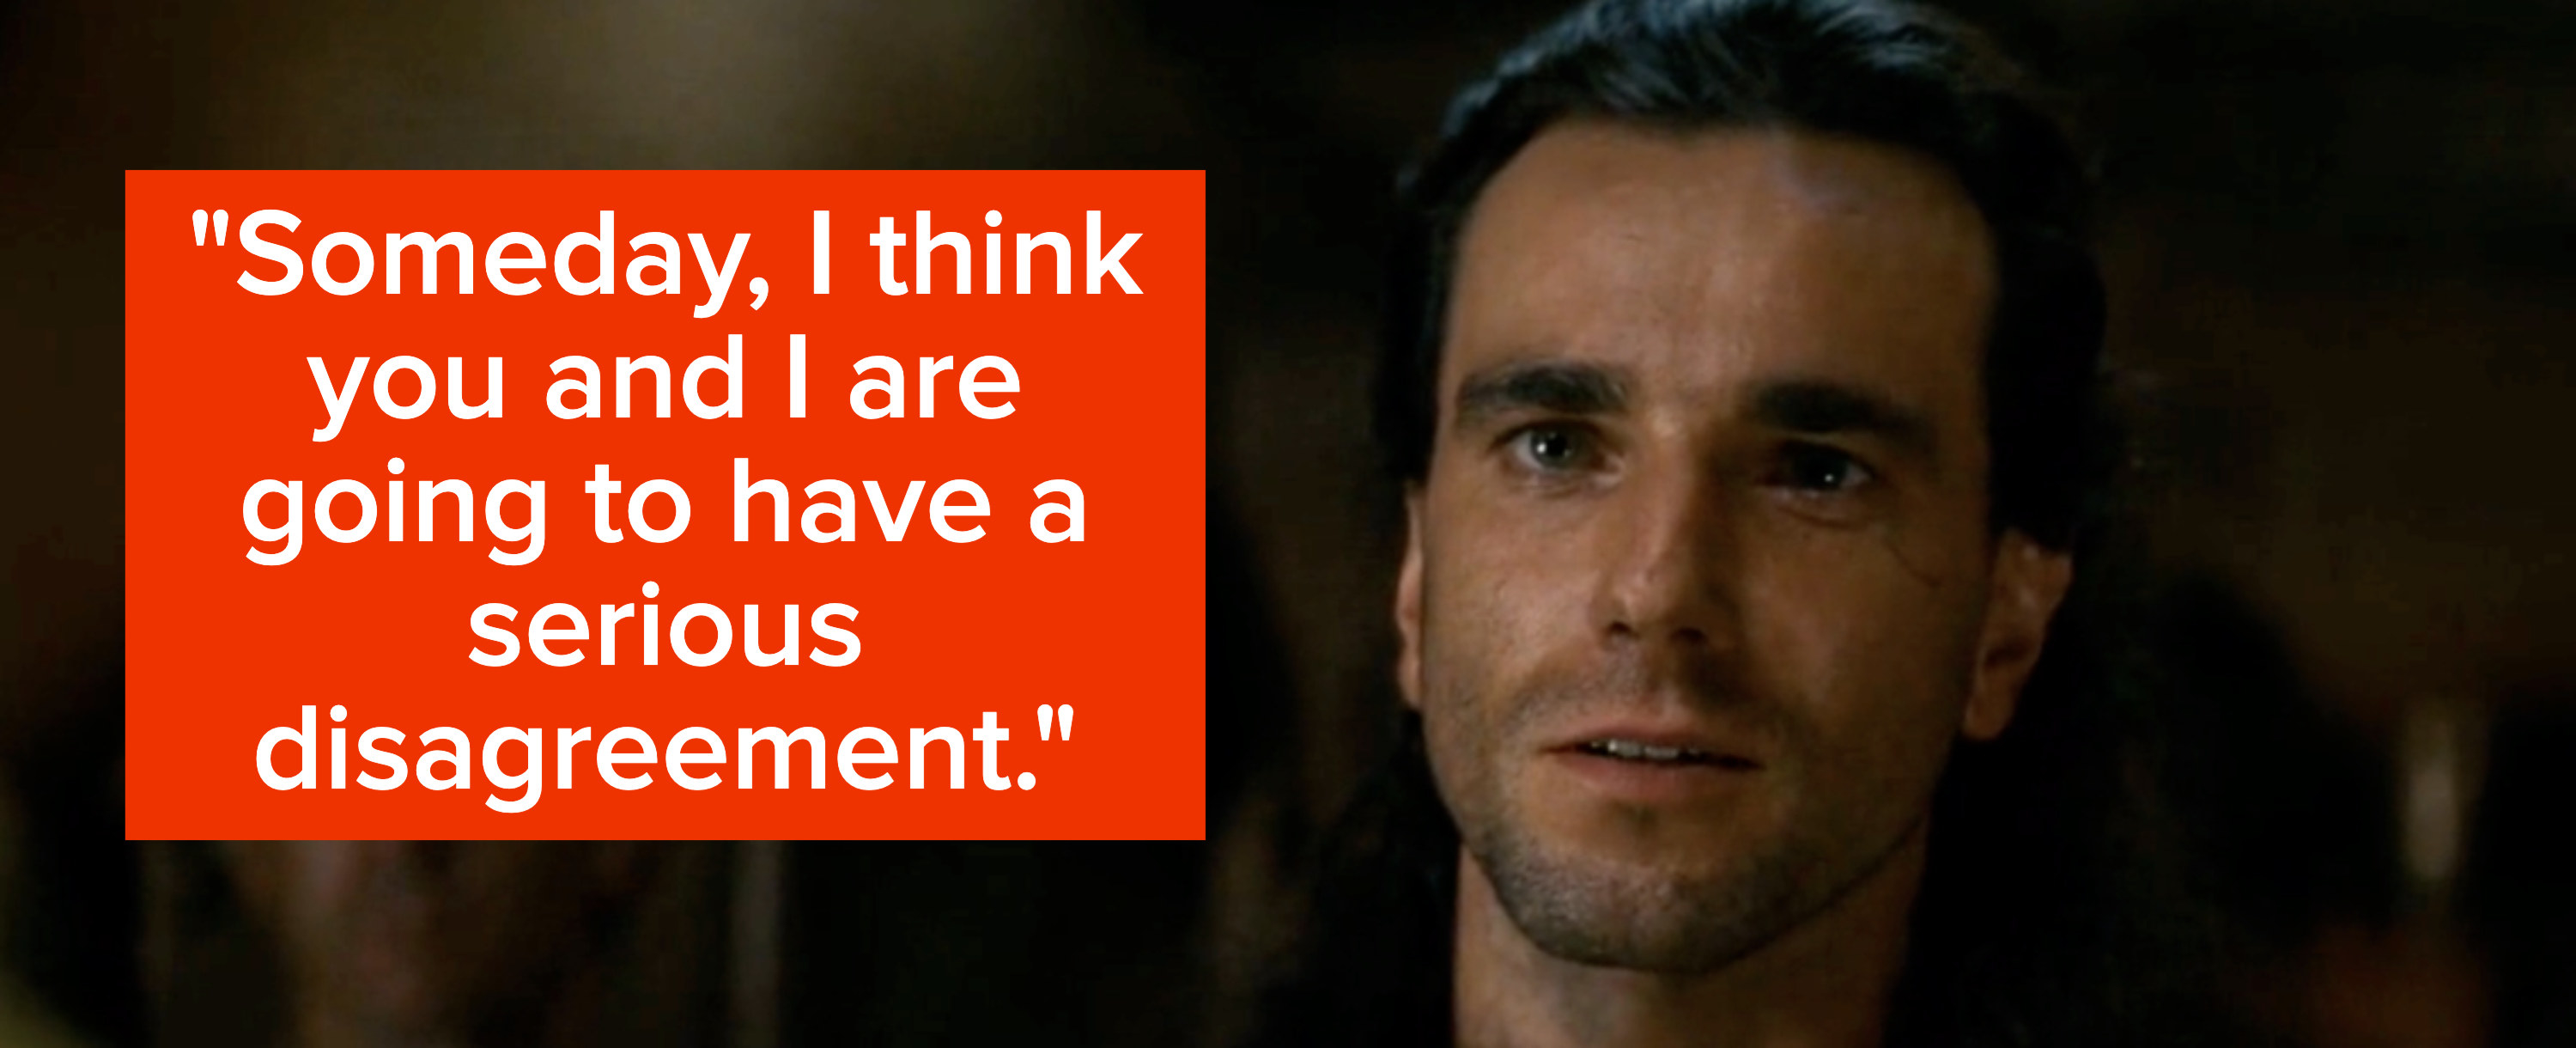 Daniel Day-Lewis says &quot;Someday, I think you and I are going to have a serious disagreement&quot;